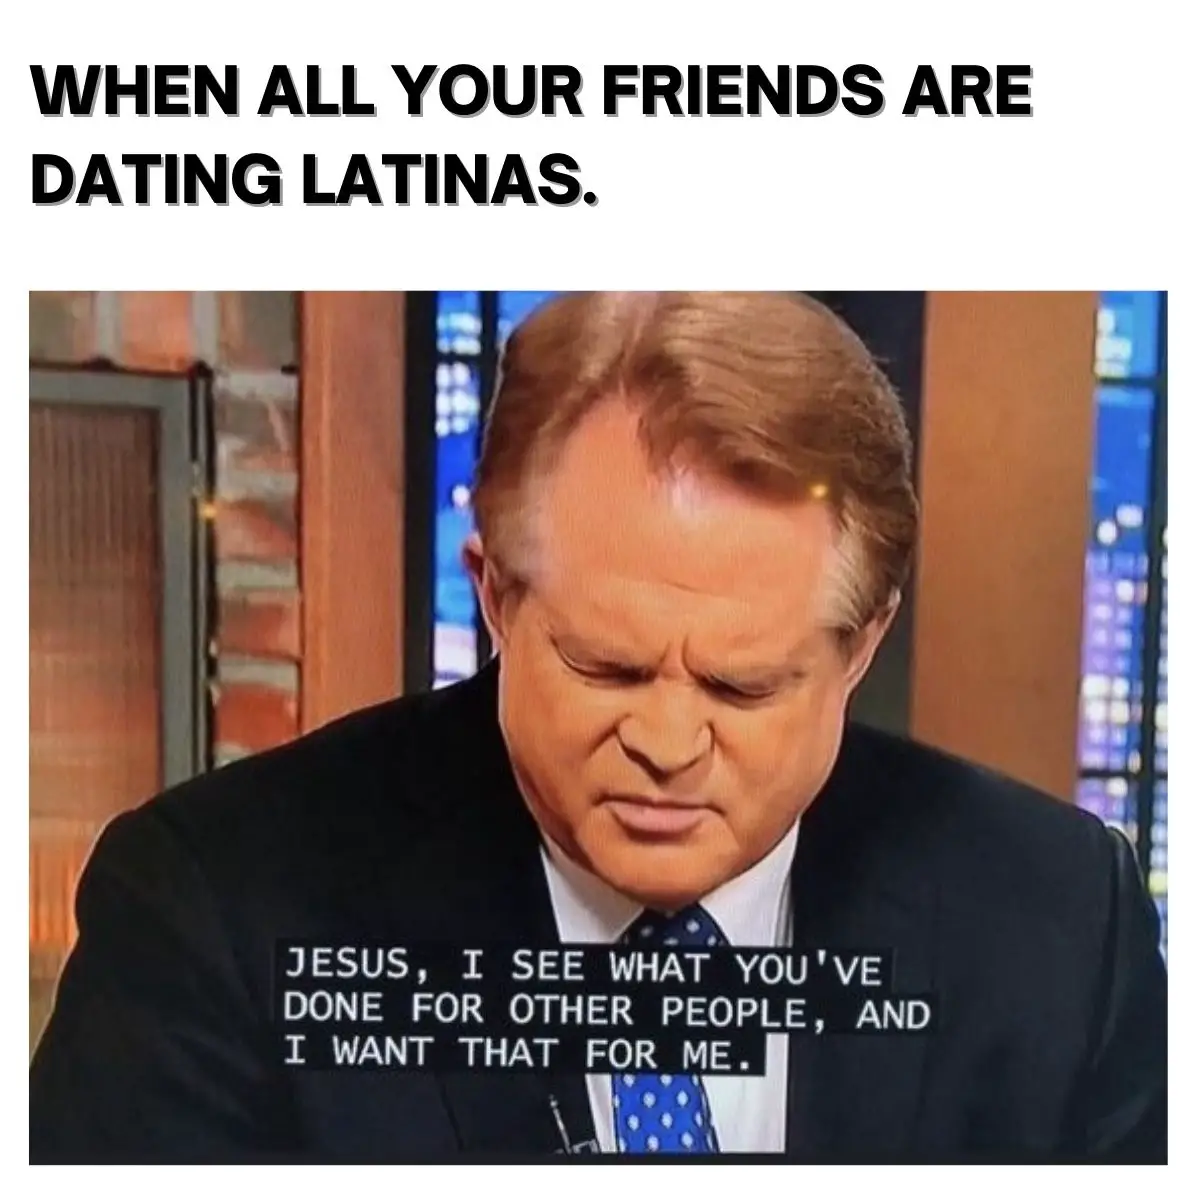 Dating Latina Meme on Jesus I see what you have done for others